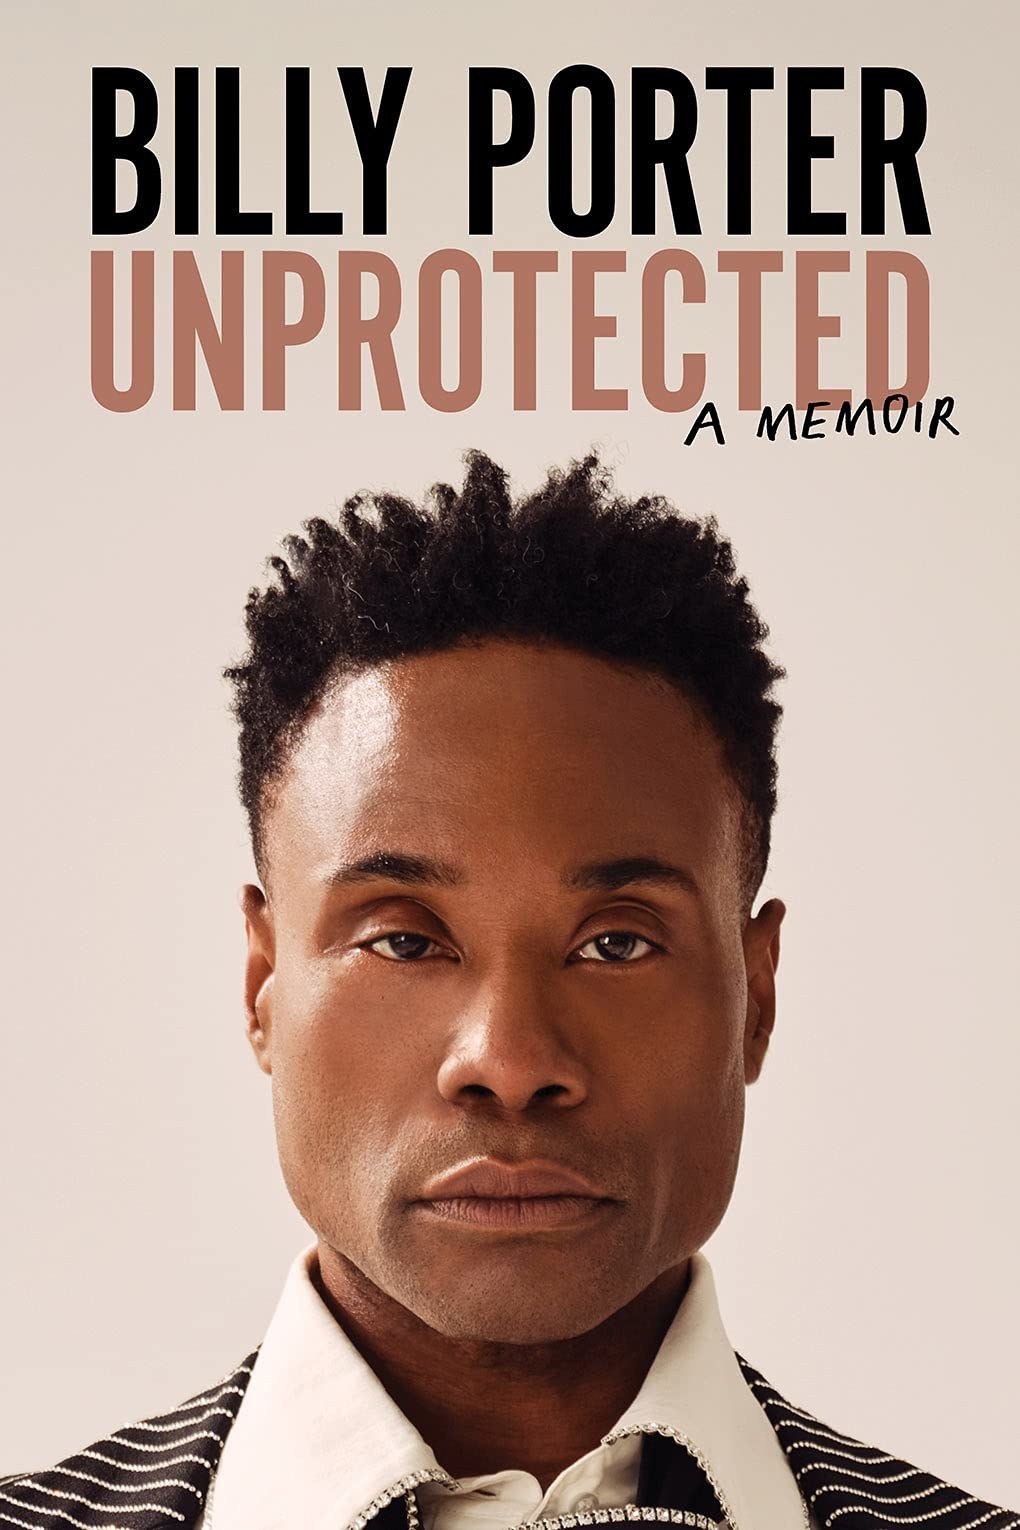 the memoir which features a profile image of Billy Porter